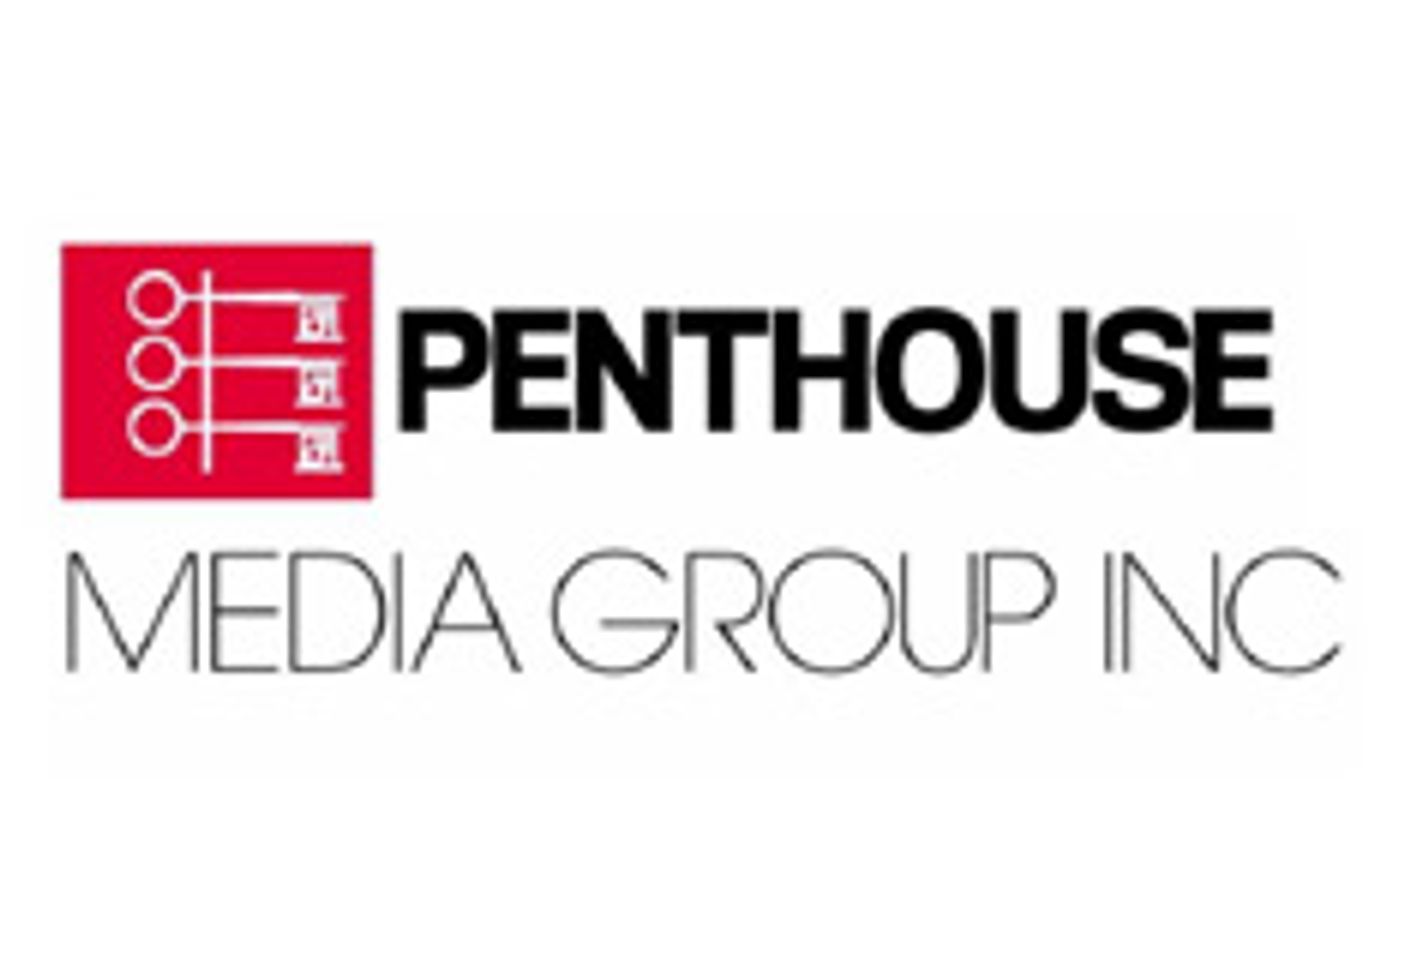 Penthouse to Launch Broadcast Network with New Funding